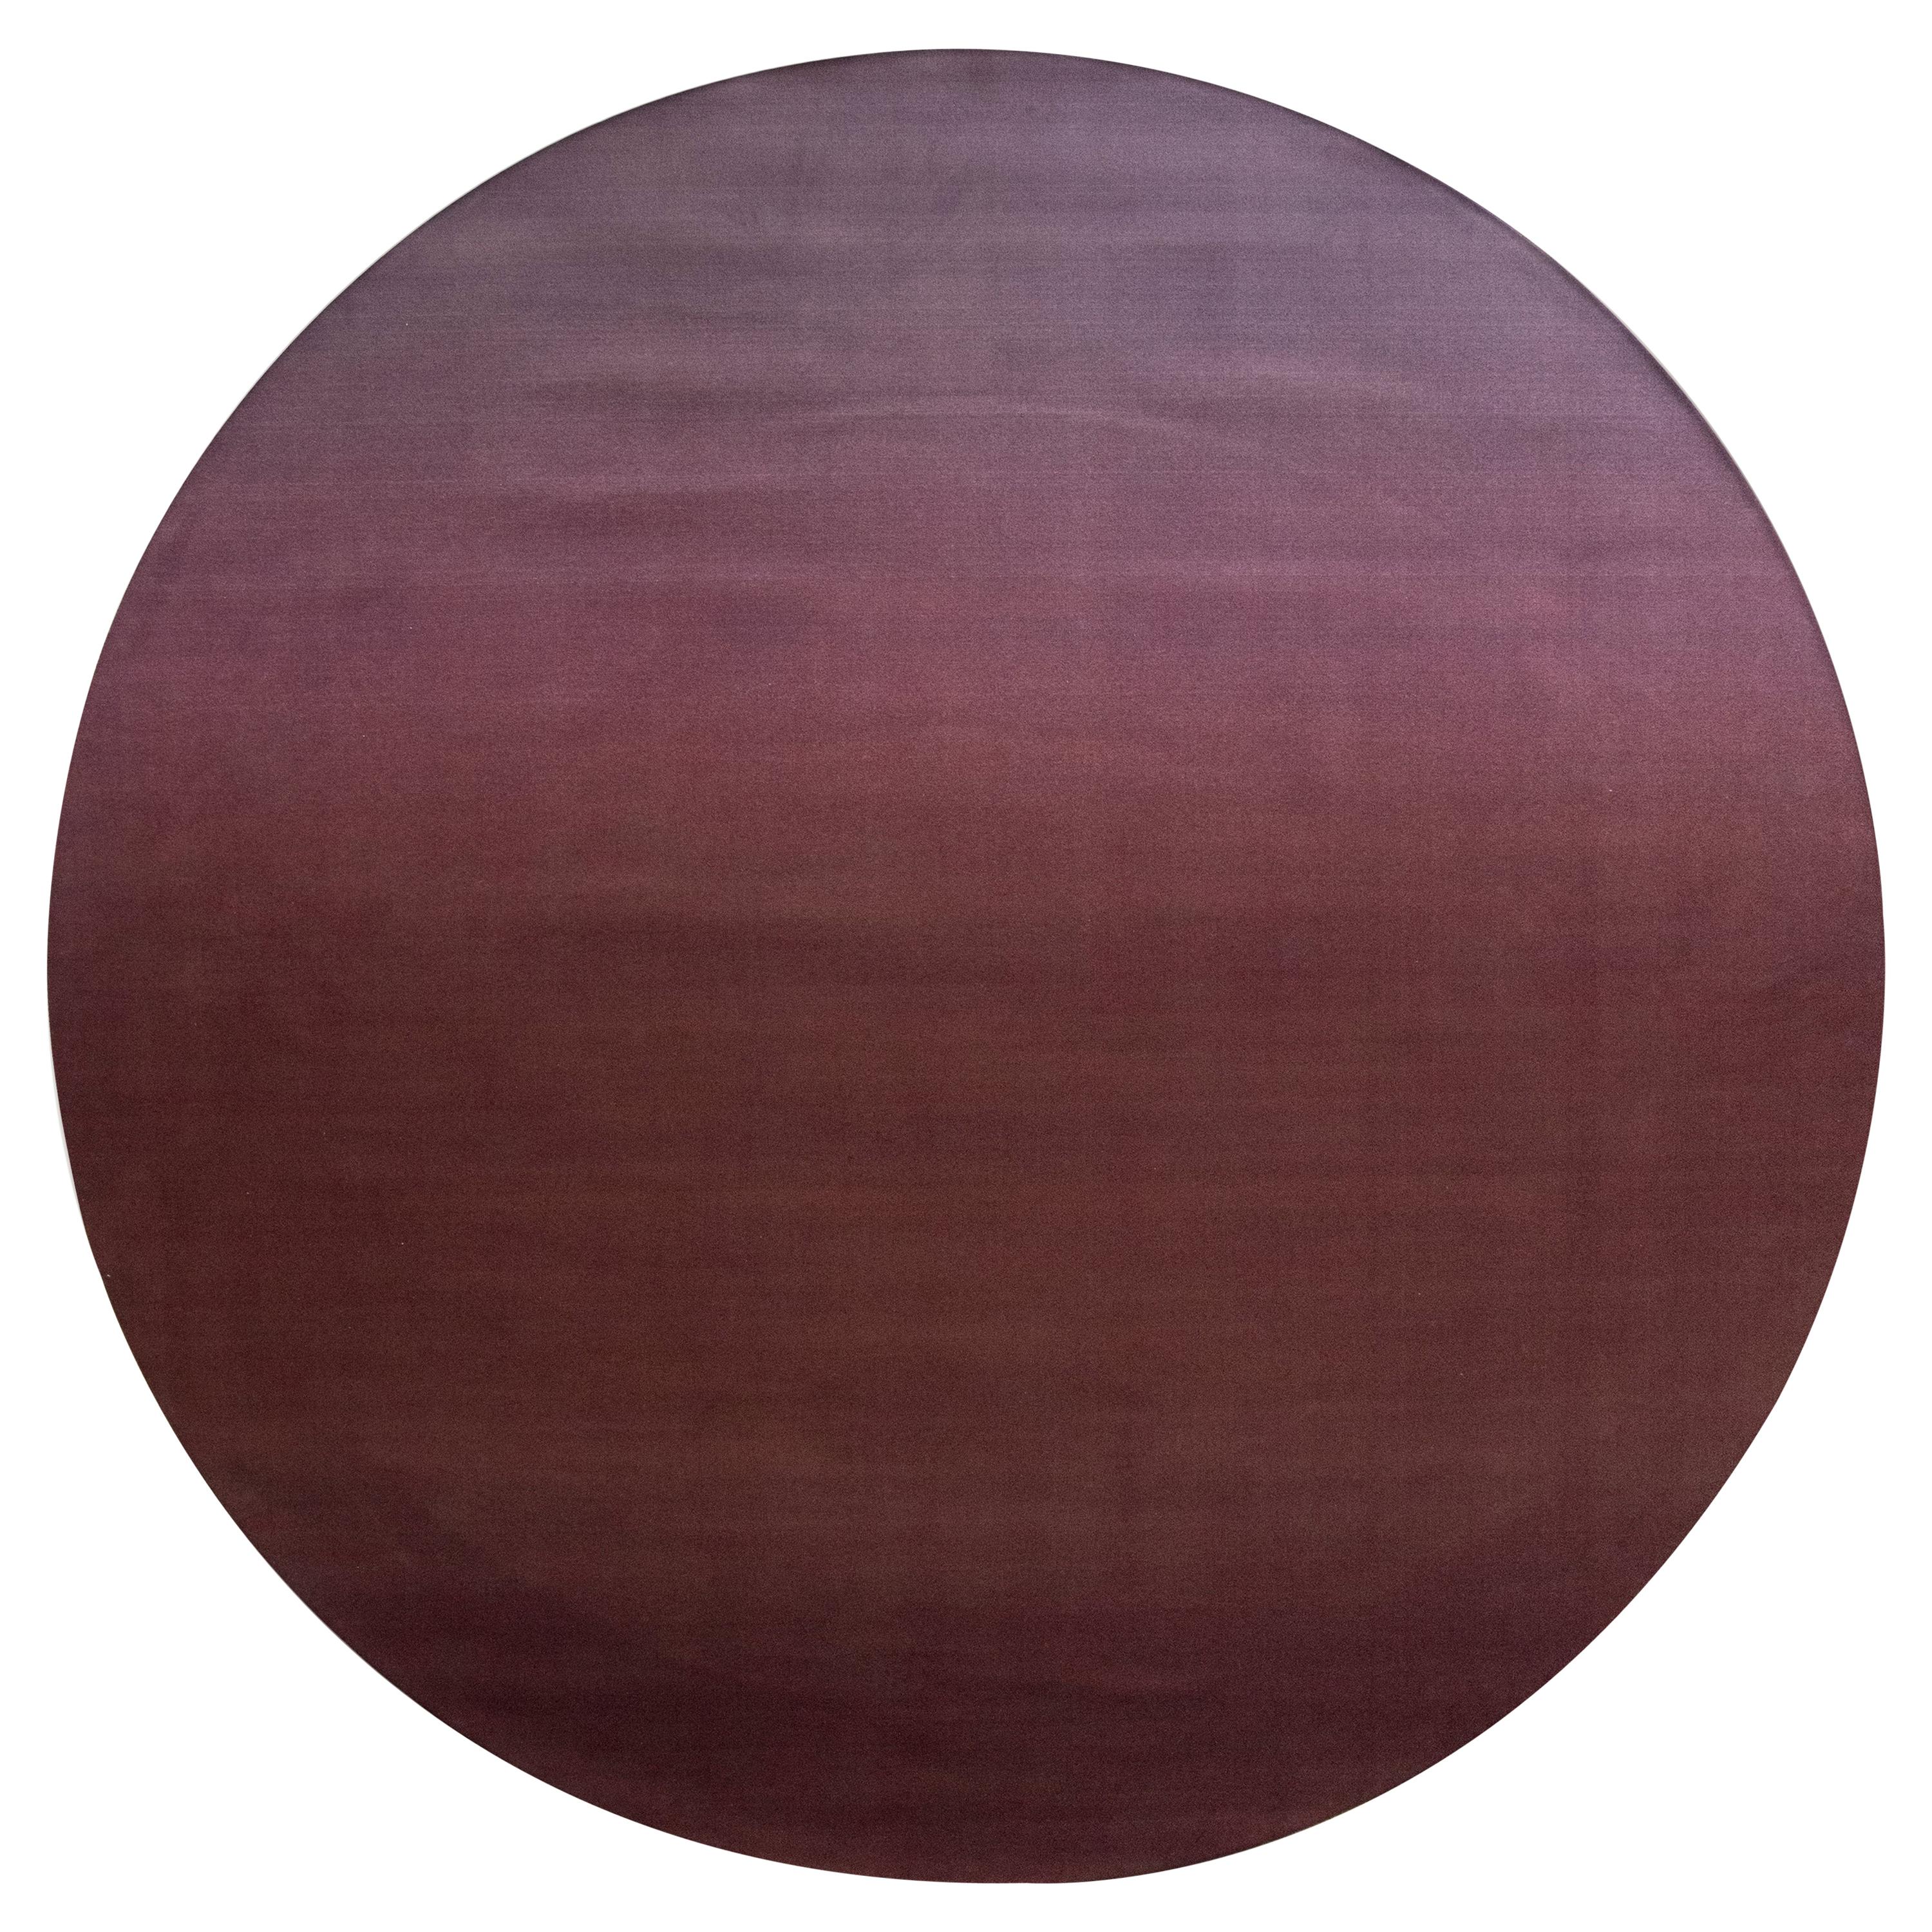 21st Cent Resistant Round Warm Red Sunset Hues Rug by Deanna Comellini ø 400 cm For Sale